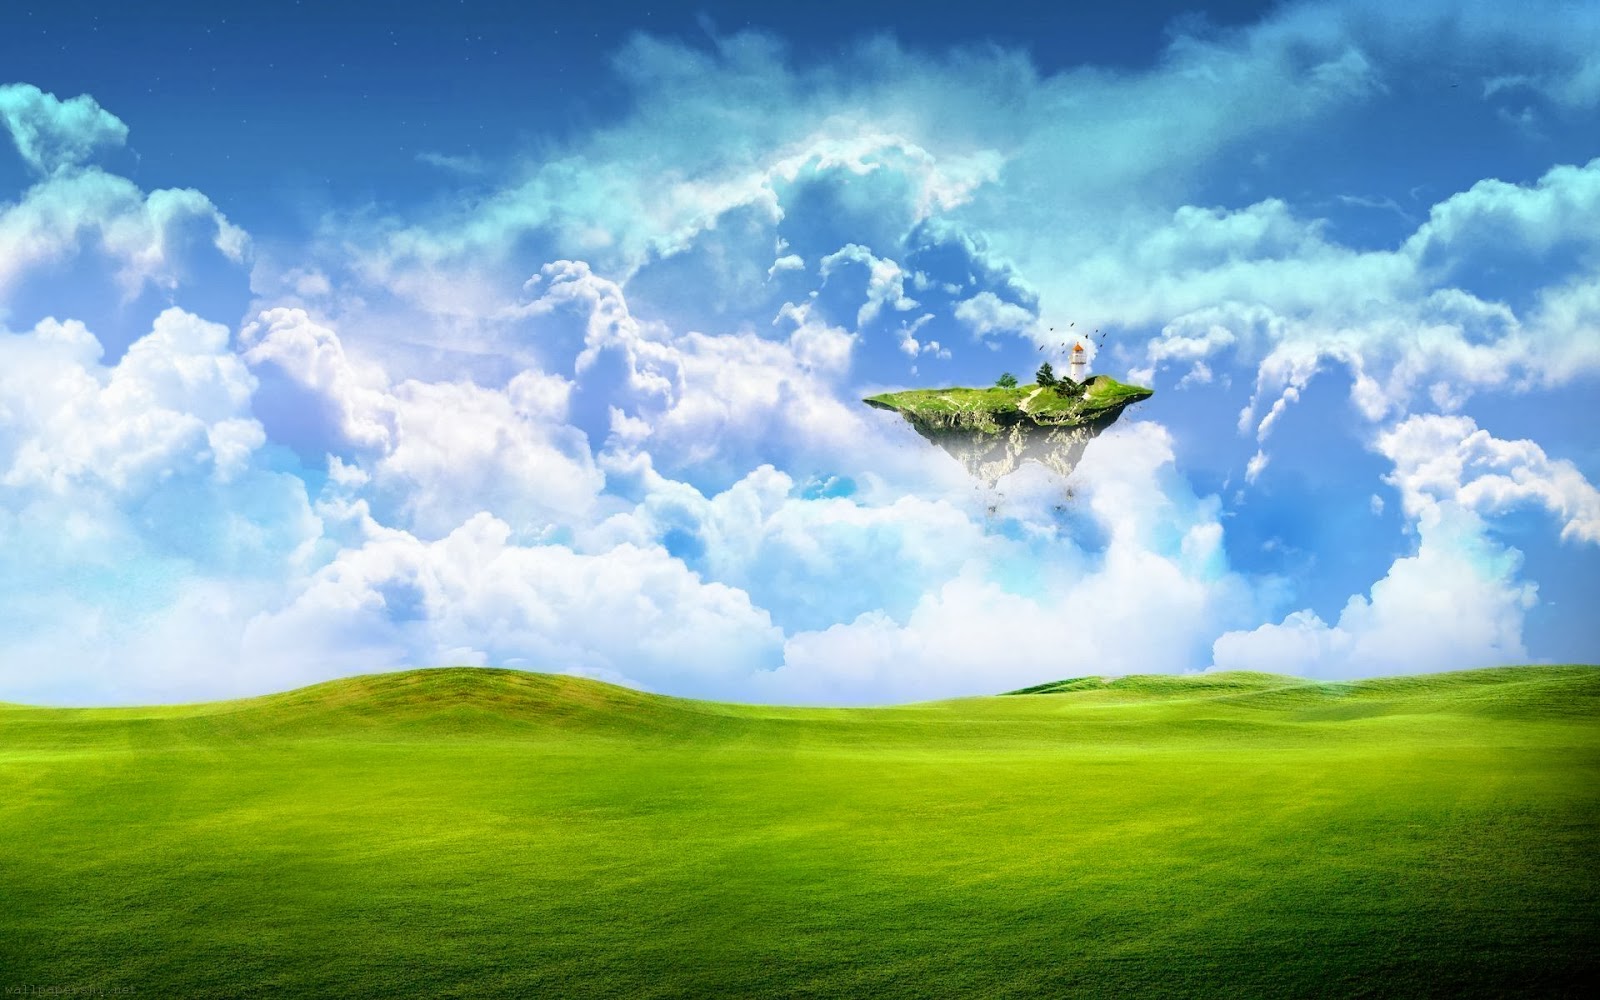 2502 8k wallpaper for pc - Rare Gallery HD Wallpapers